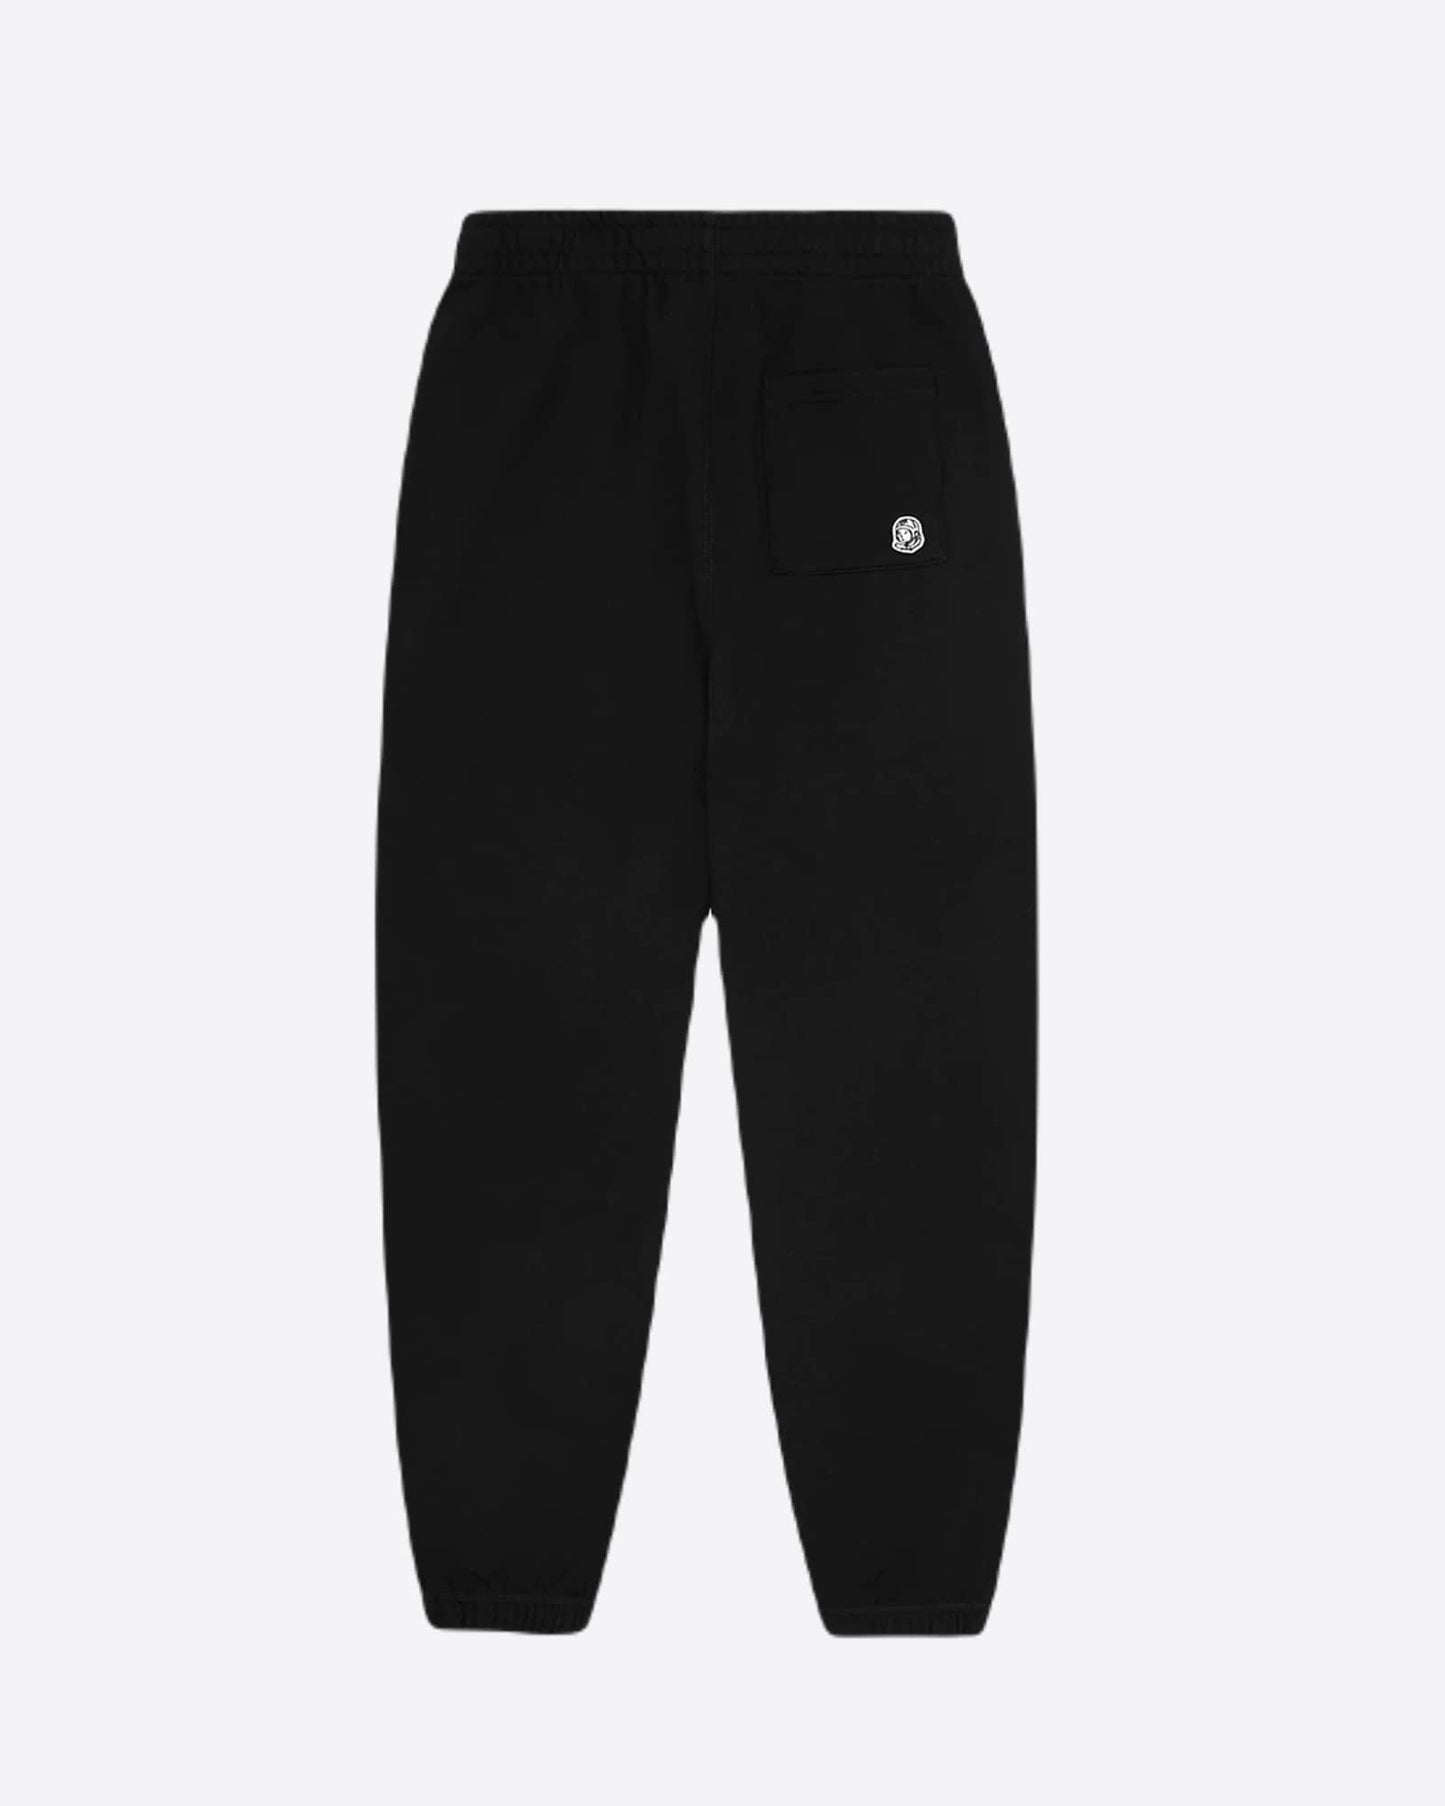 Small Arch Highlight Sweatpants